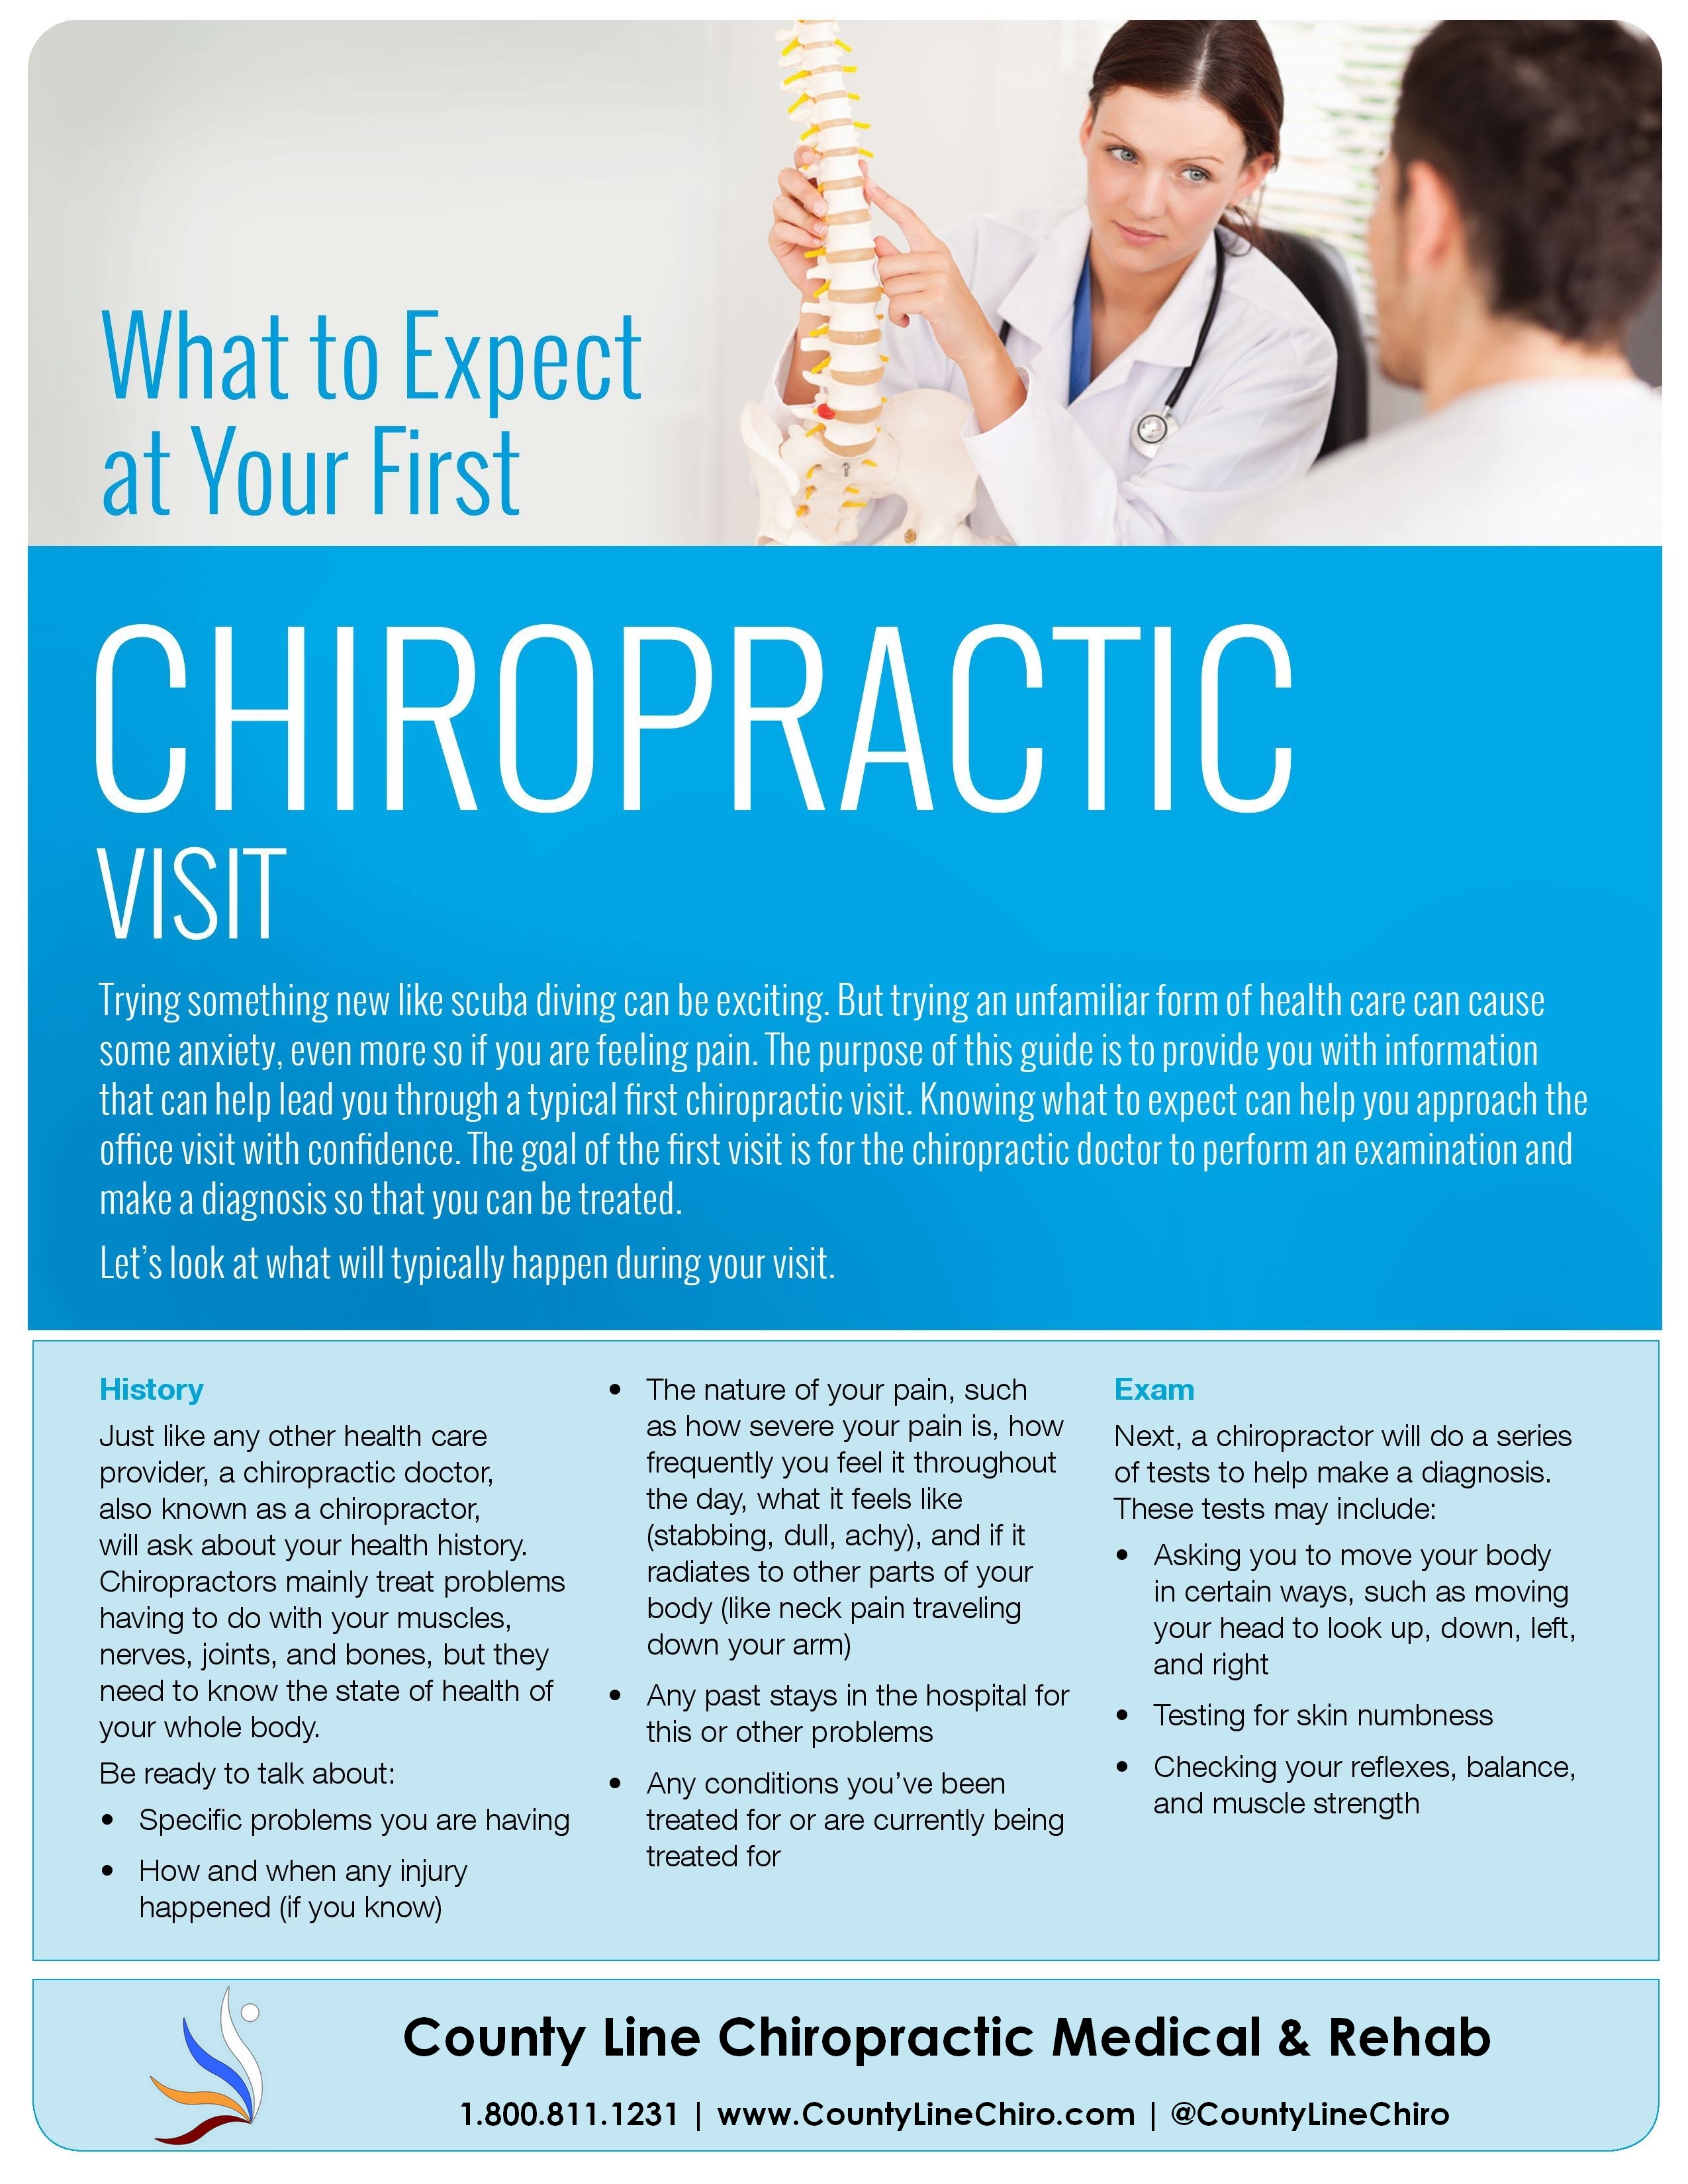 What to Expect at Your First Chiropractic Visit